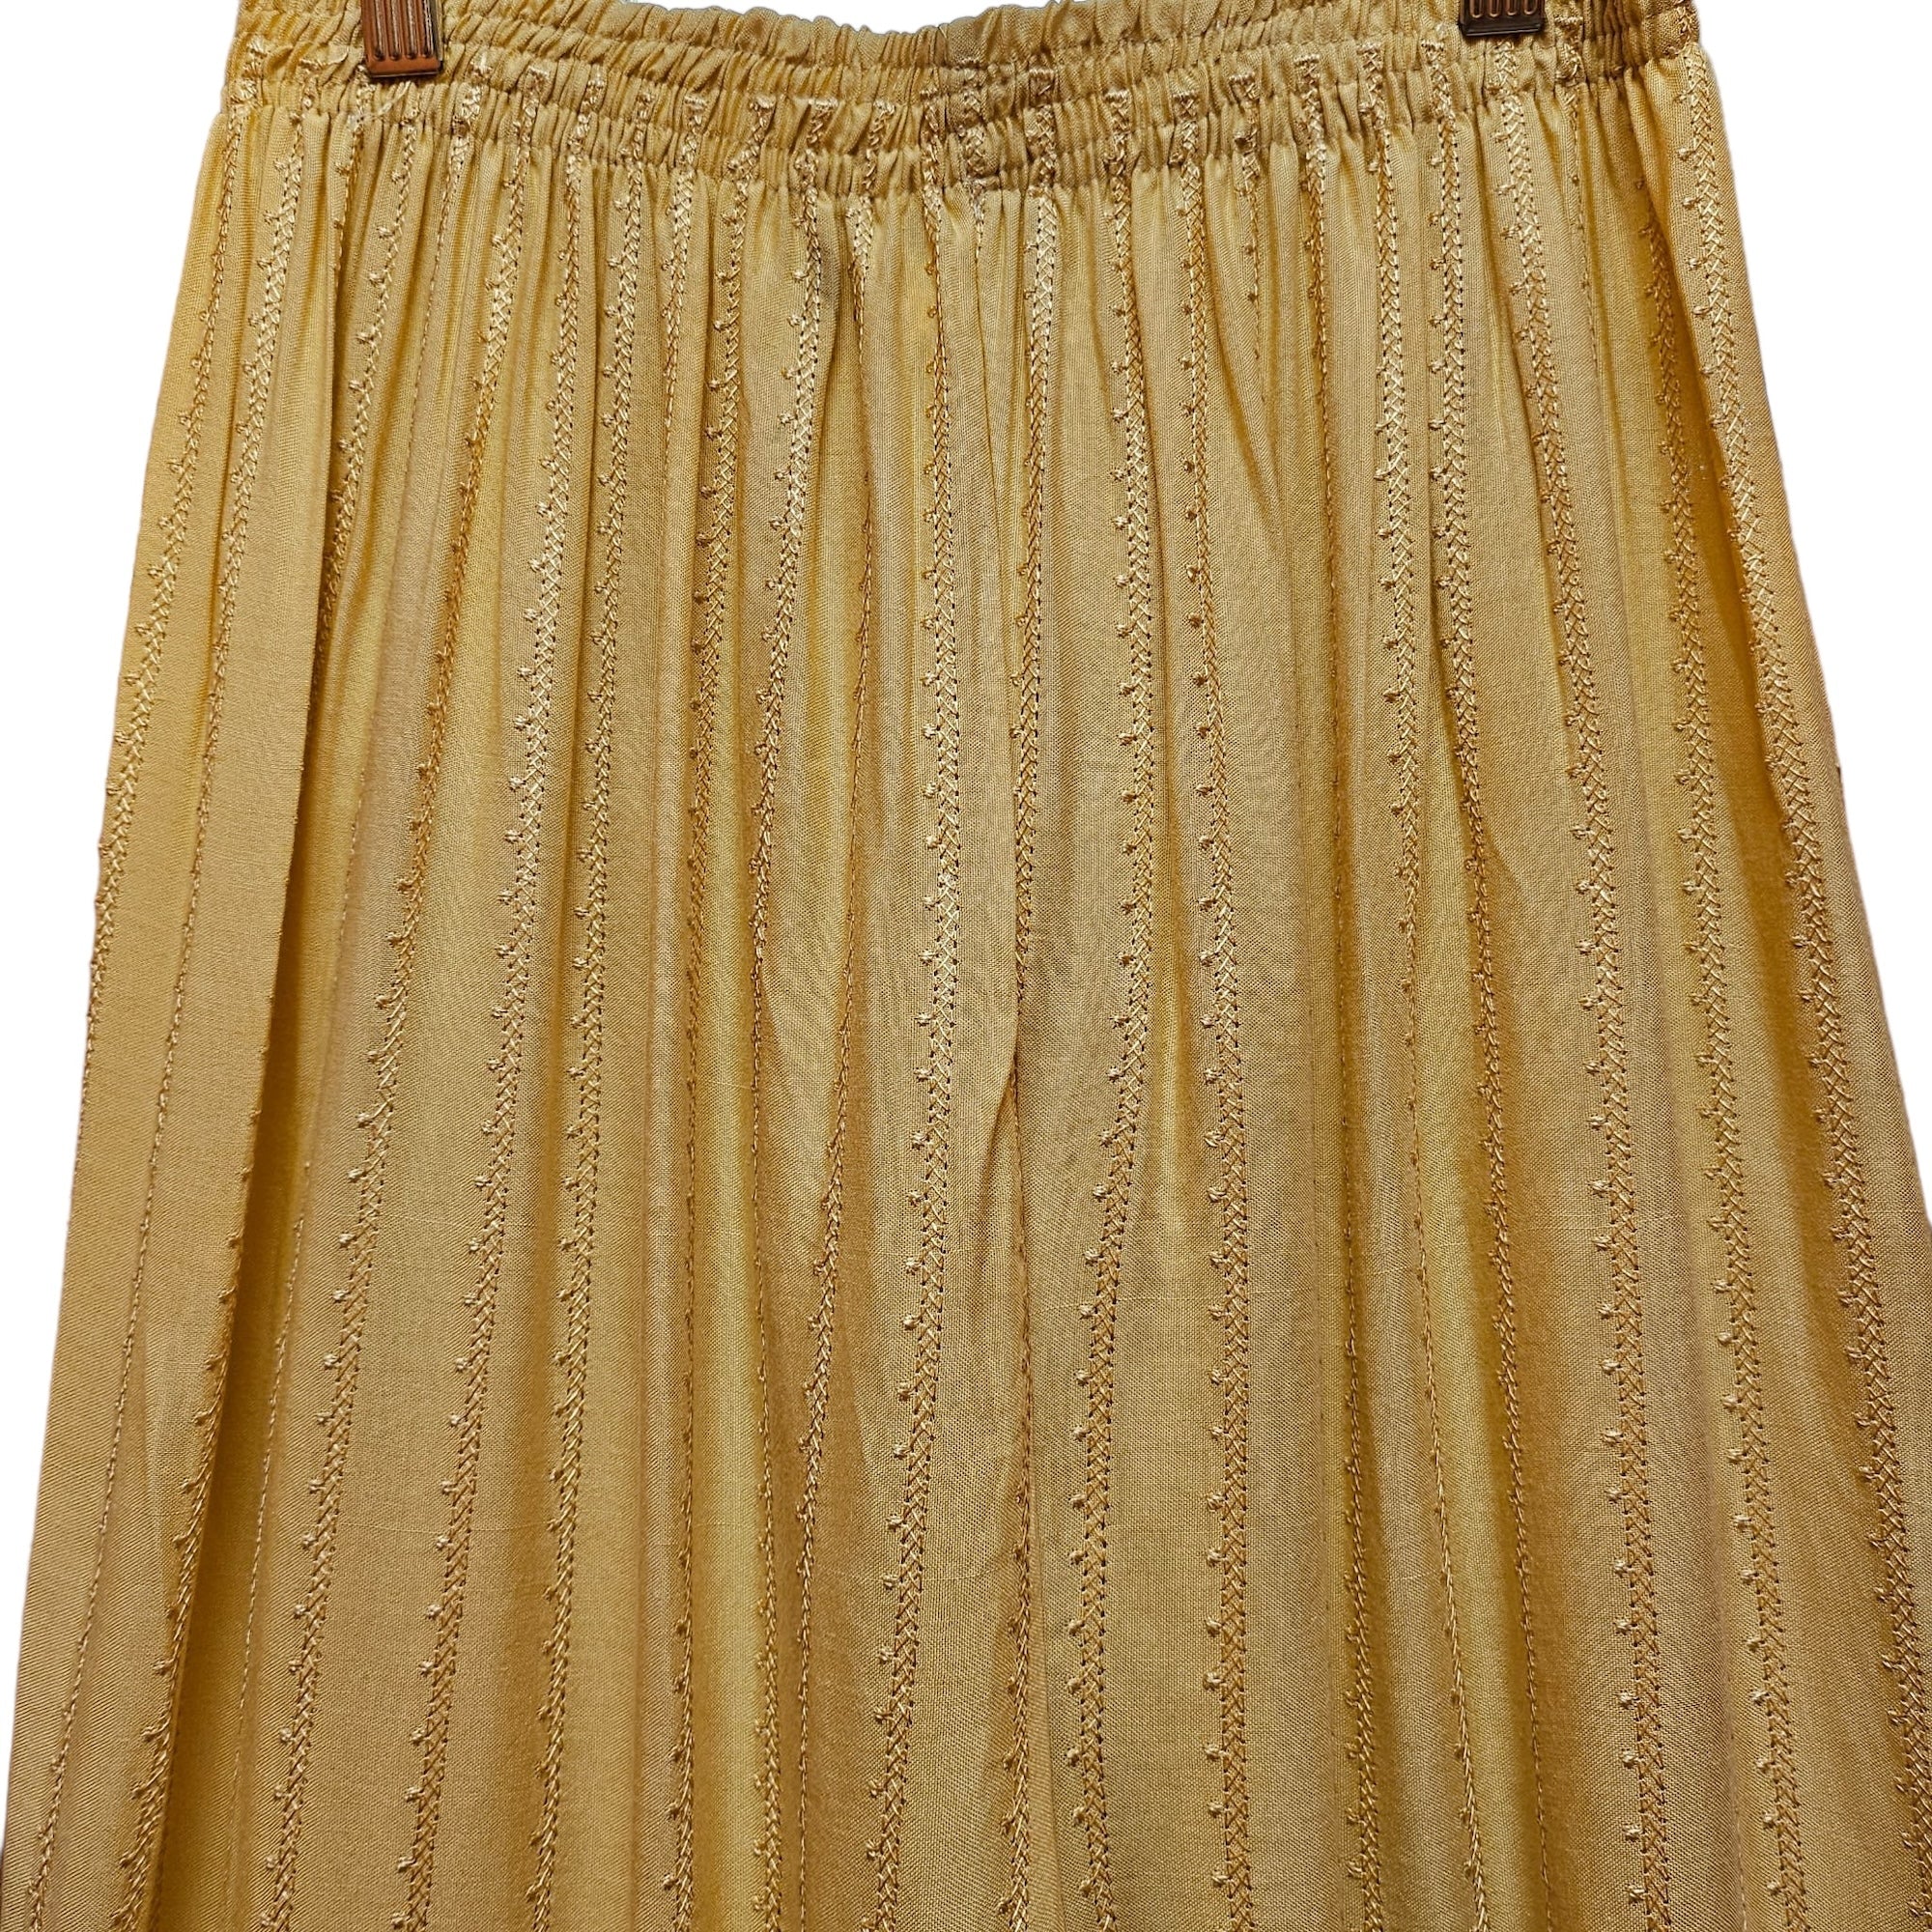 Embroidered Palazzo Pants-Neutrals - Vintage India NYC